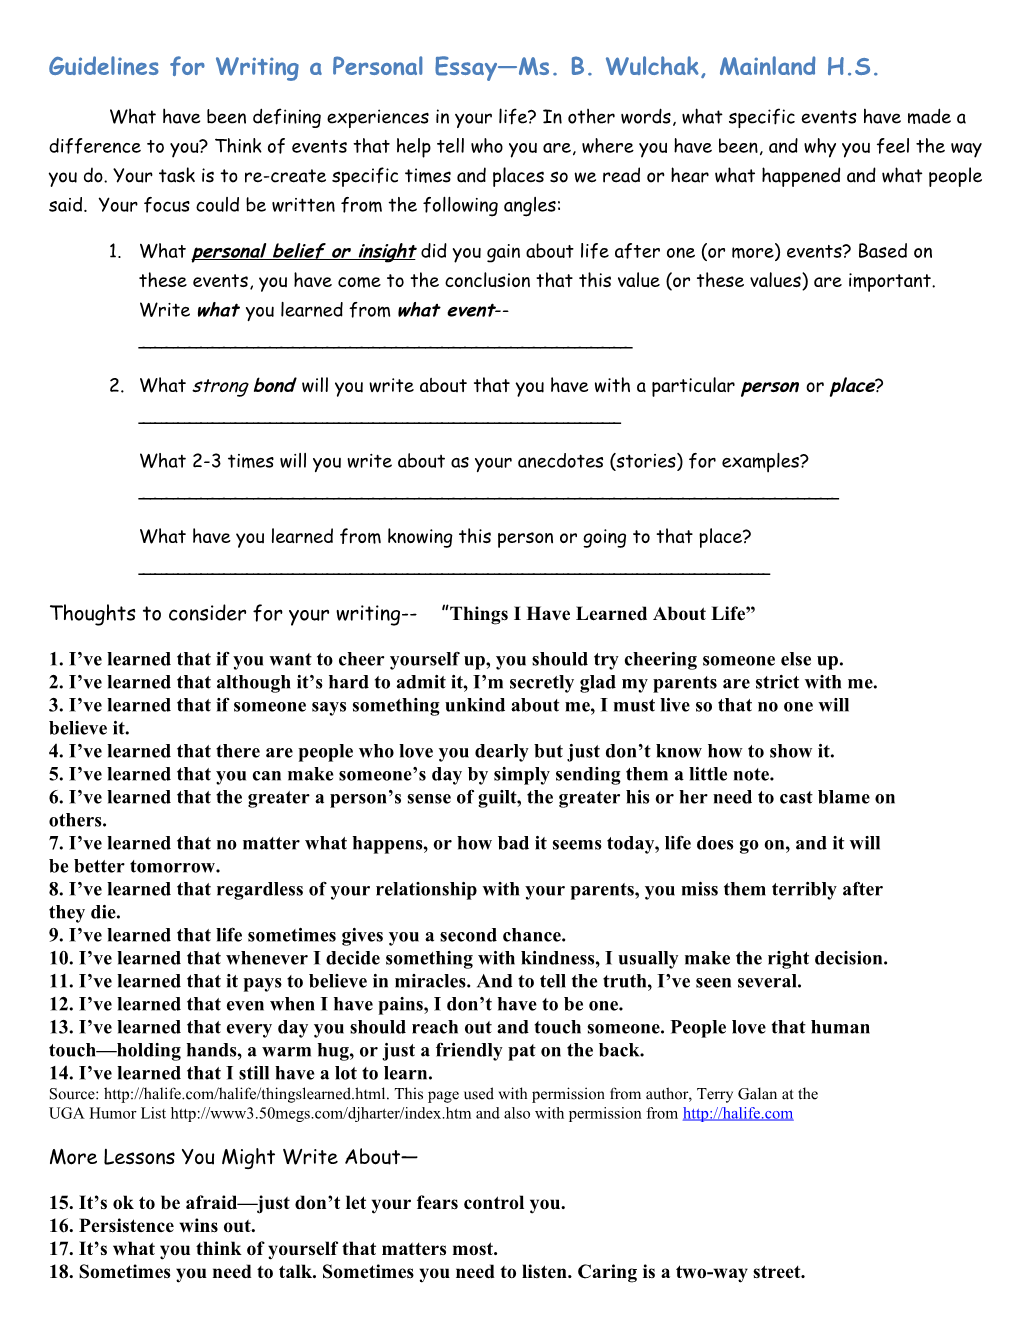 Guidelines for Writing a Personal Essay Ms. B. Wulchak, Mainland H.S